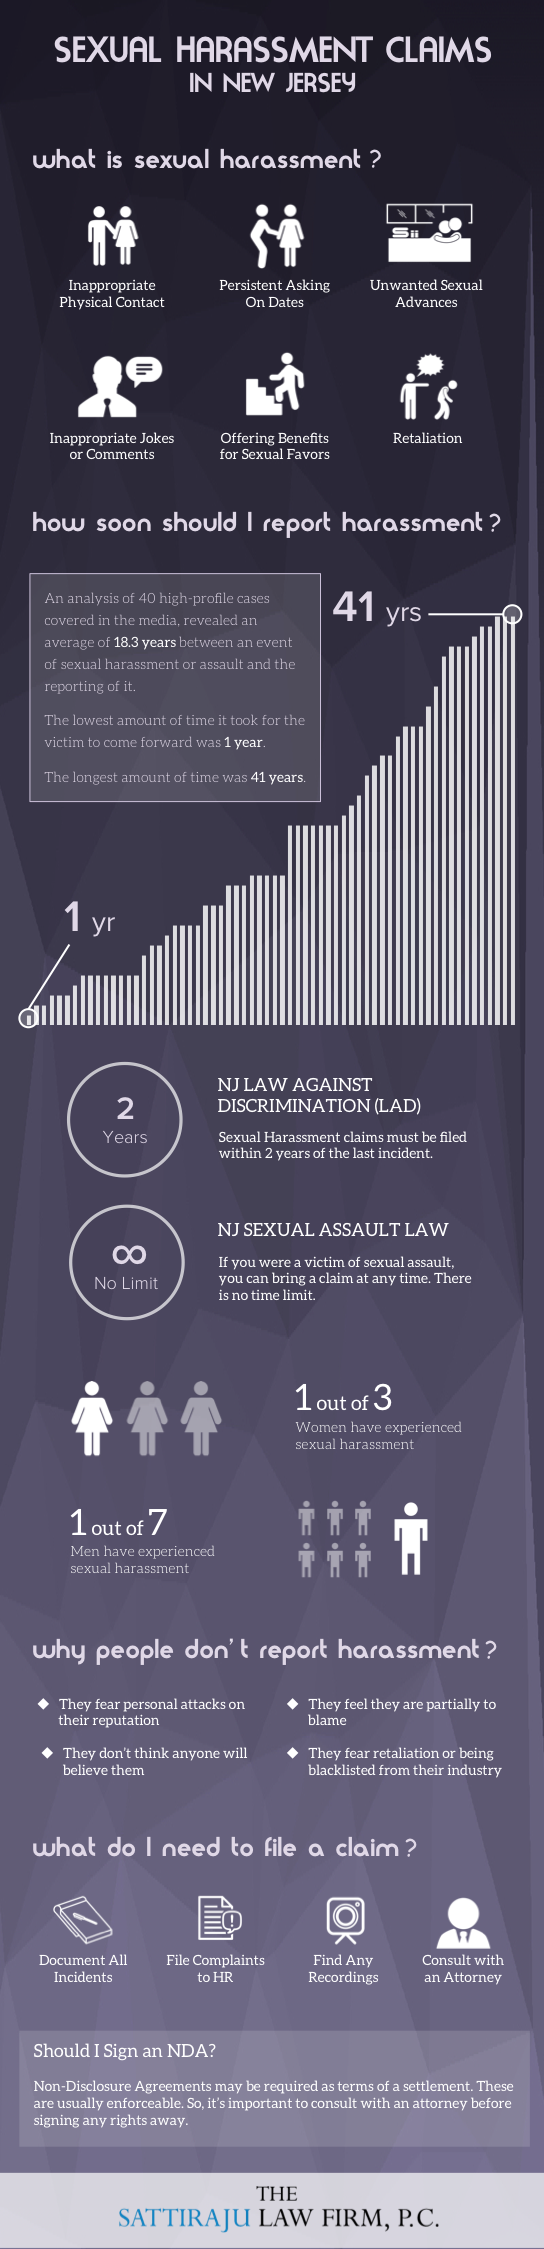 sexual harassment infographic